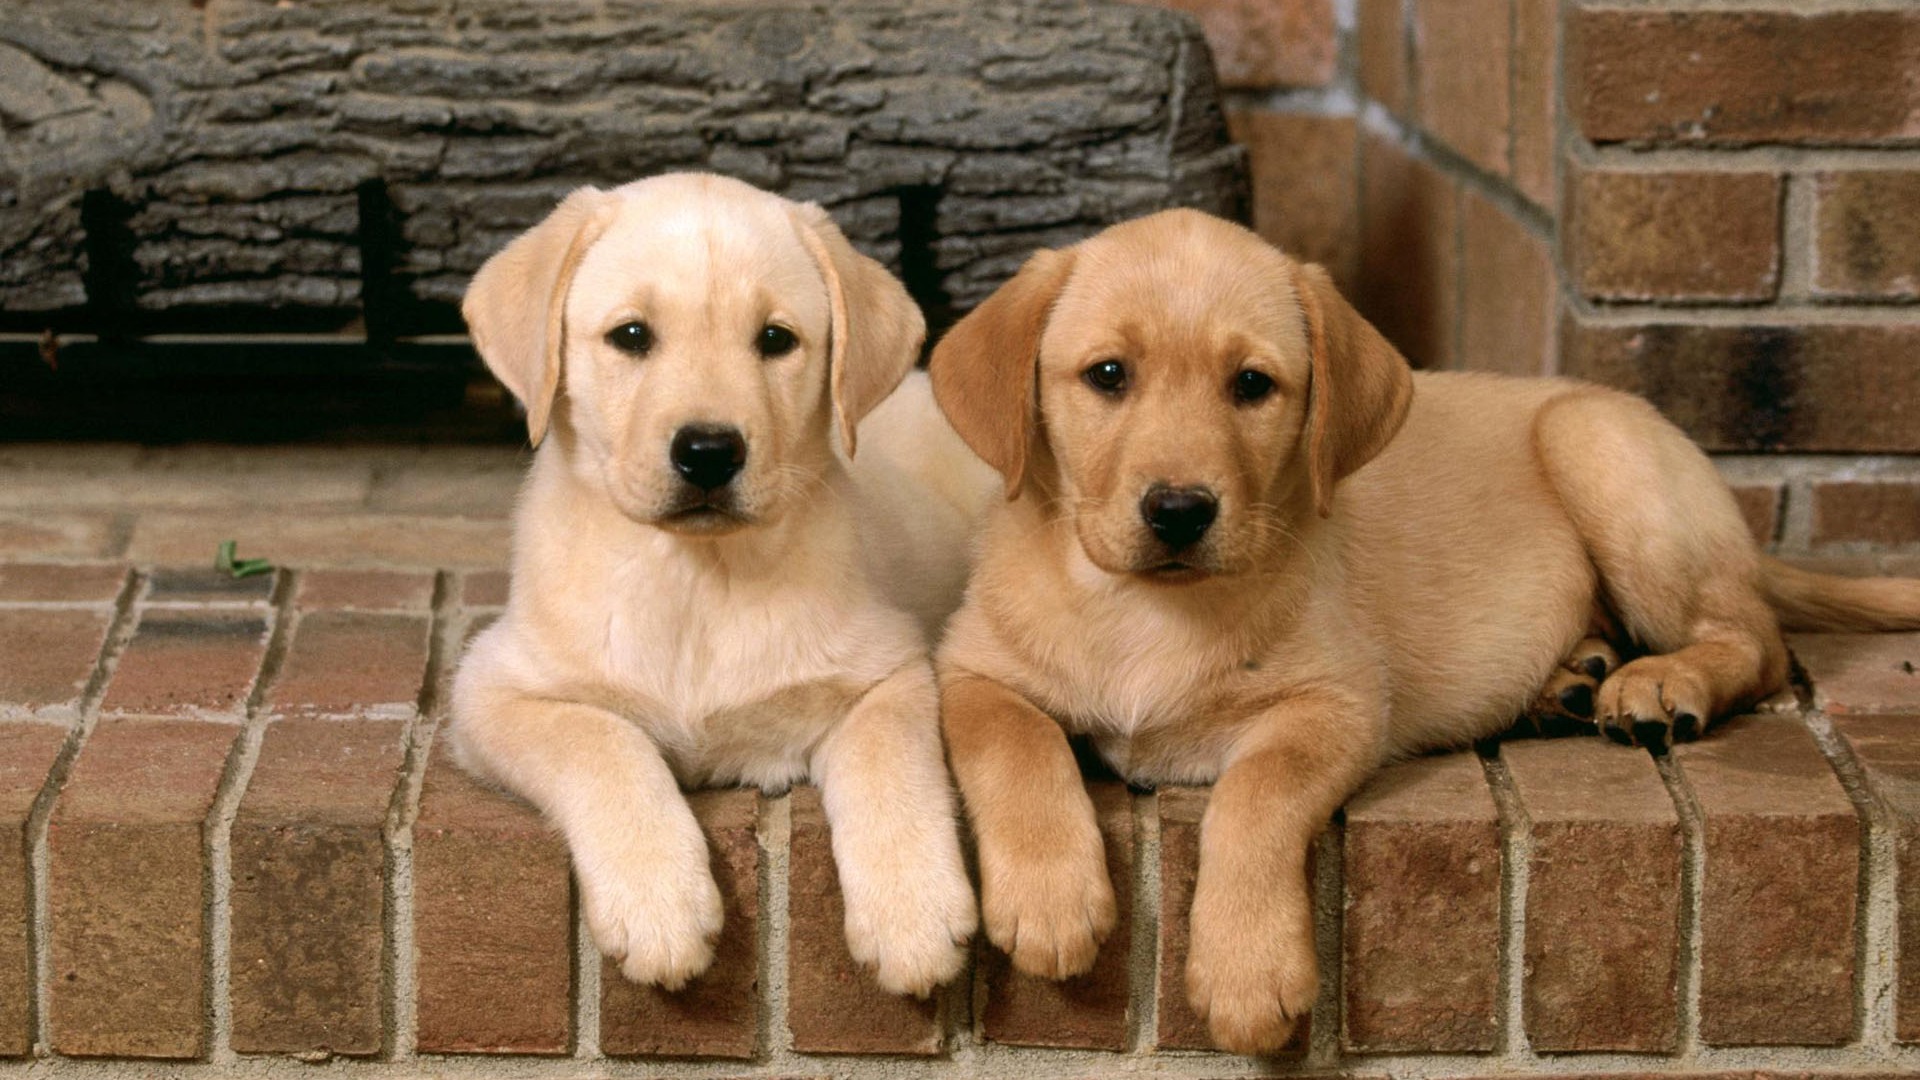 Puppy Photo HD wallpapers (2) #11 - 1920x1080